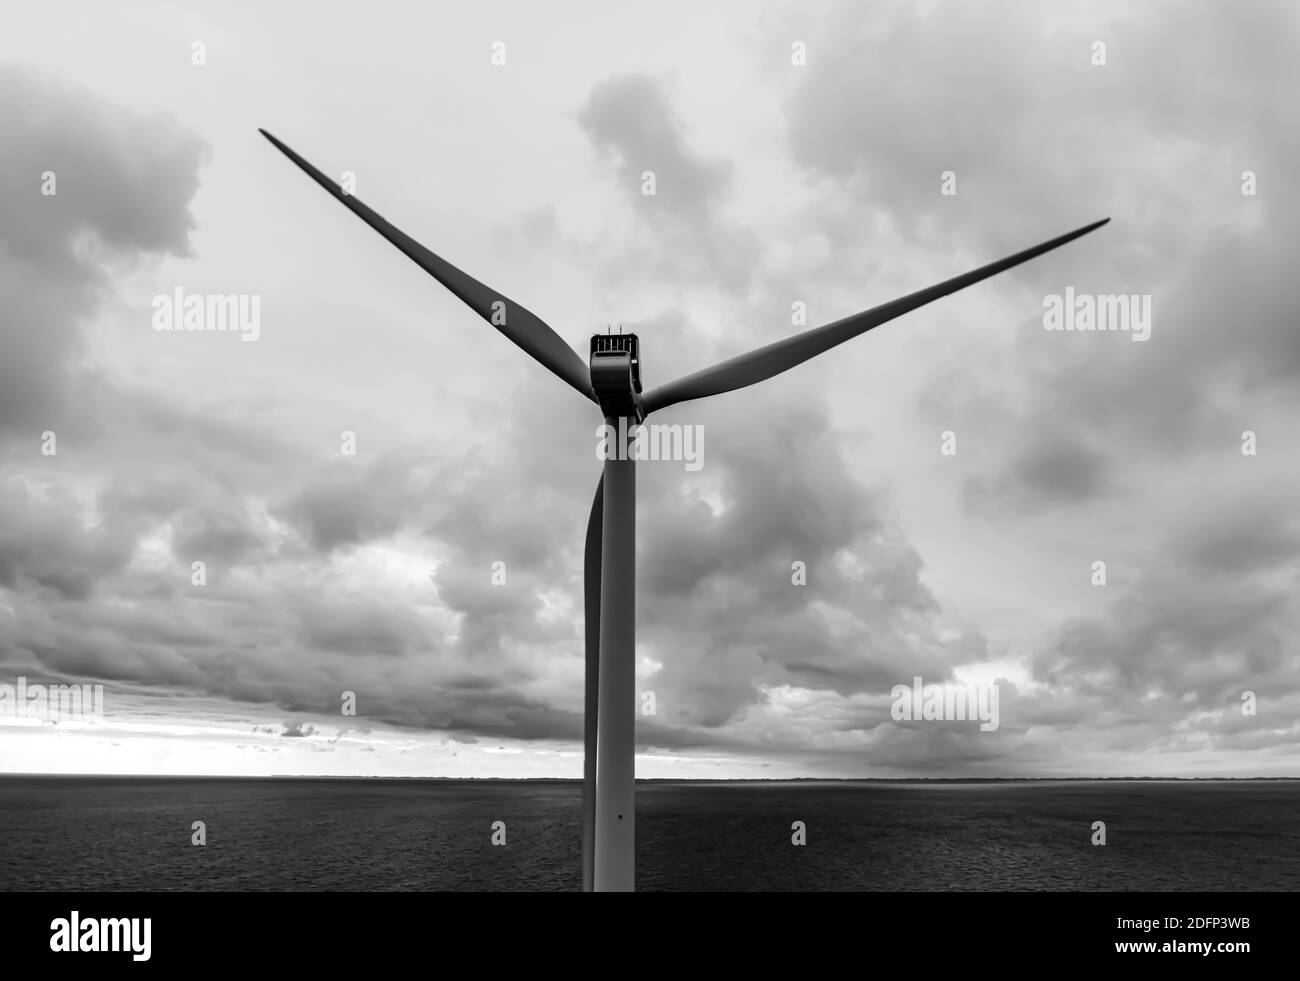 Black and white image of a modern wind turbine in the ocean with stormy clouds in the distance. Stock Photo